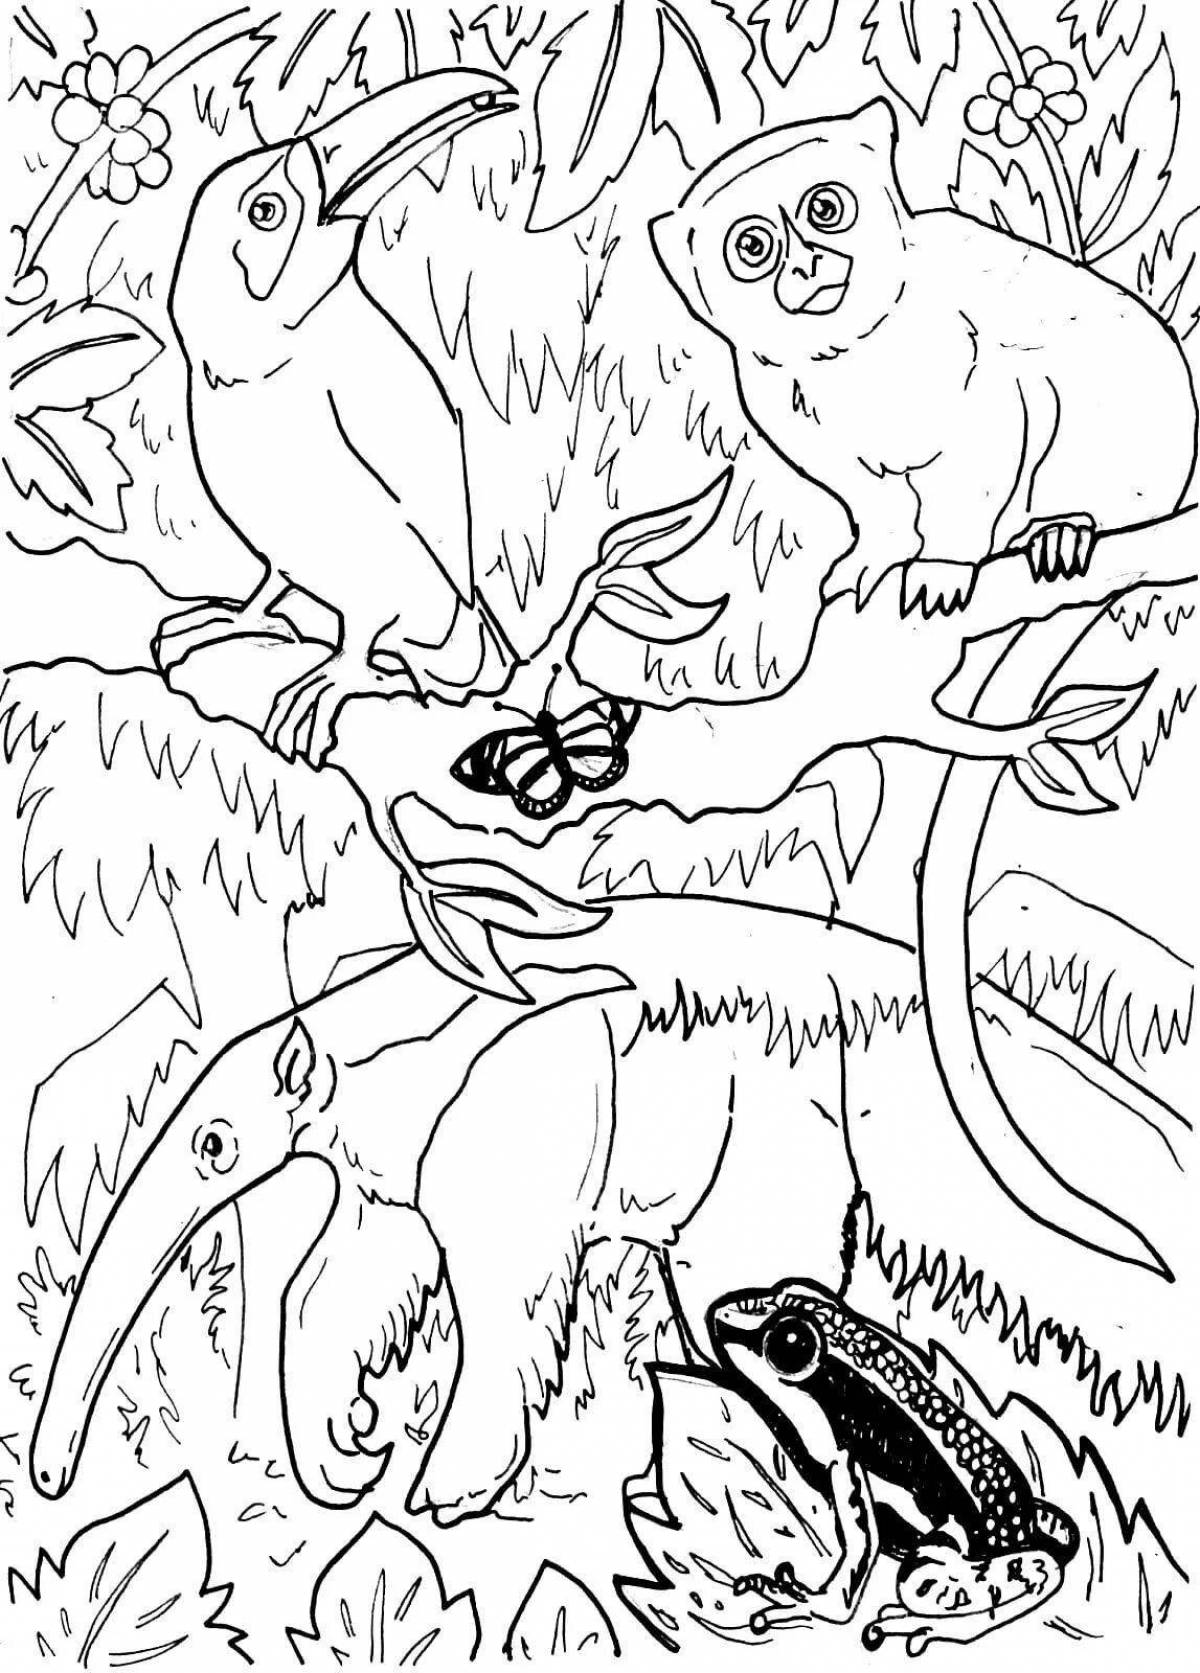 Awesome tropical animal coloring pages